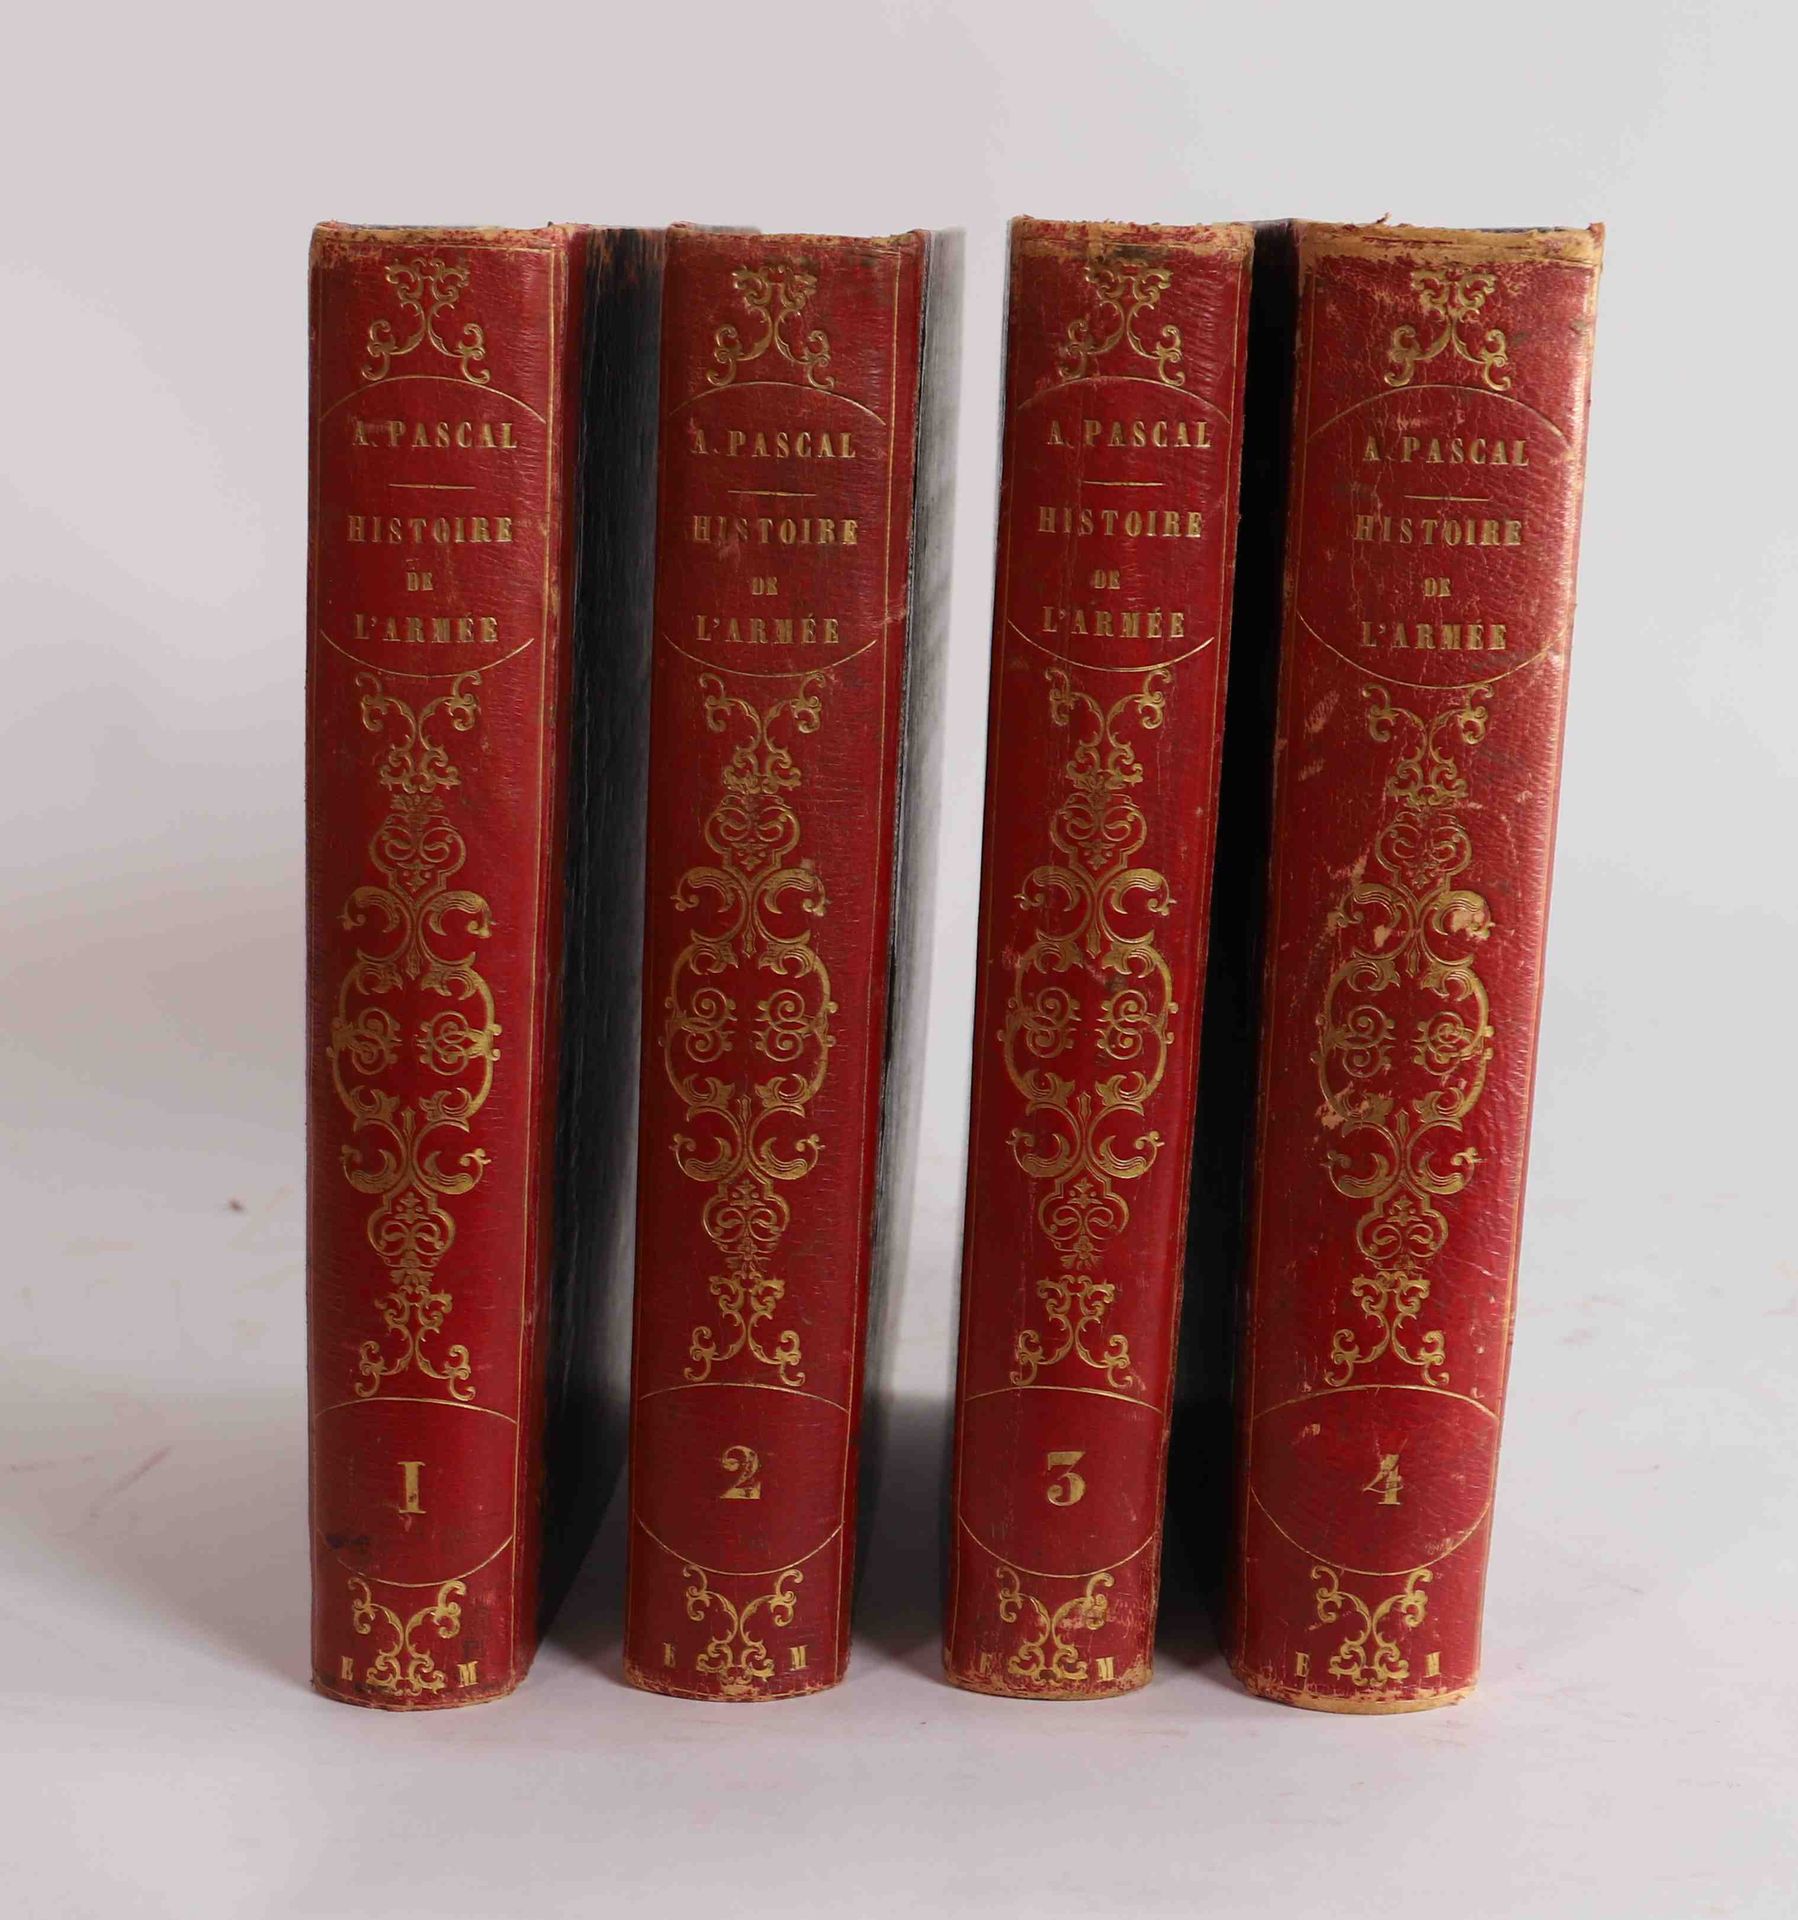 Null "History of the Army and all the regiments" Adrien PASCAL (1814-1863)

Comp&hellip;